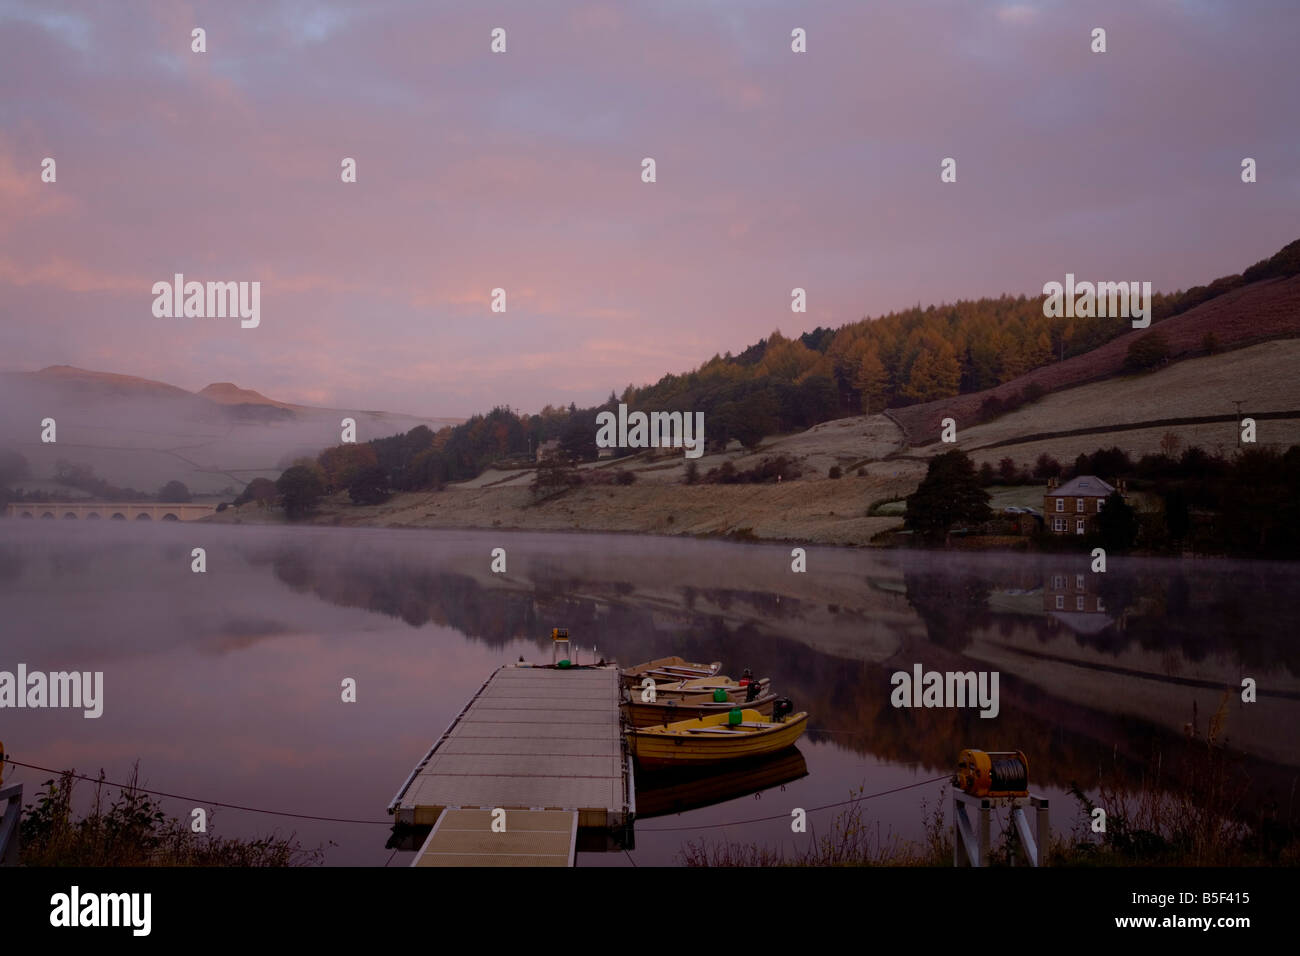 Misty sunrise over Ladybower Dam. Boats moored to a pontoon many reflections in the calm water. Ashopton viaduct in background. Stock Photo